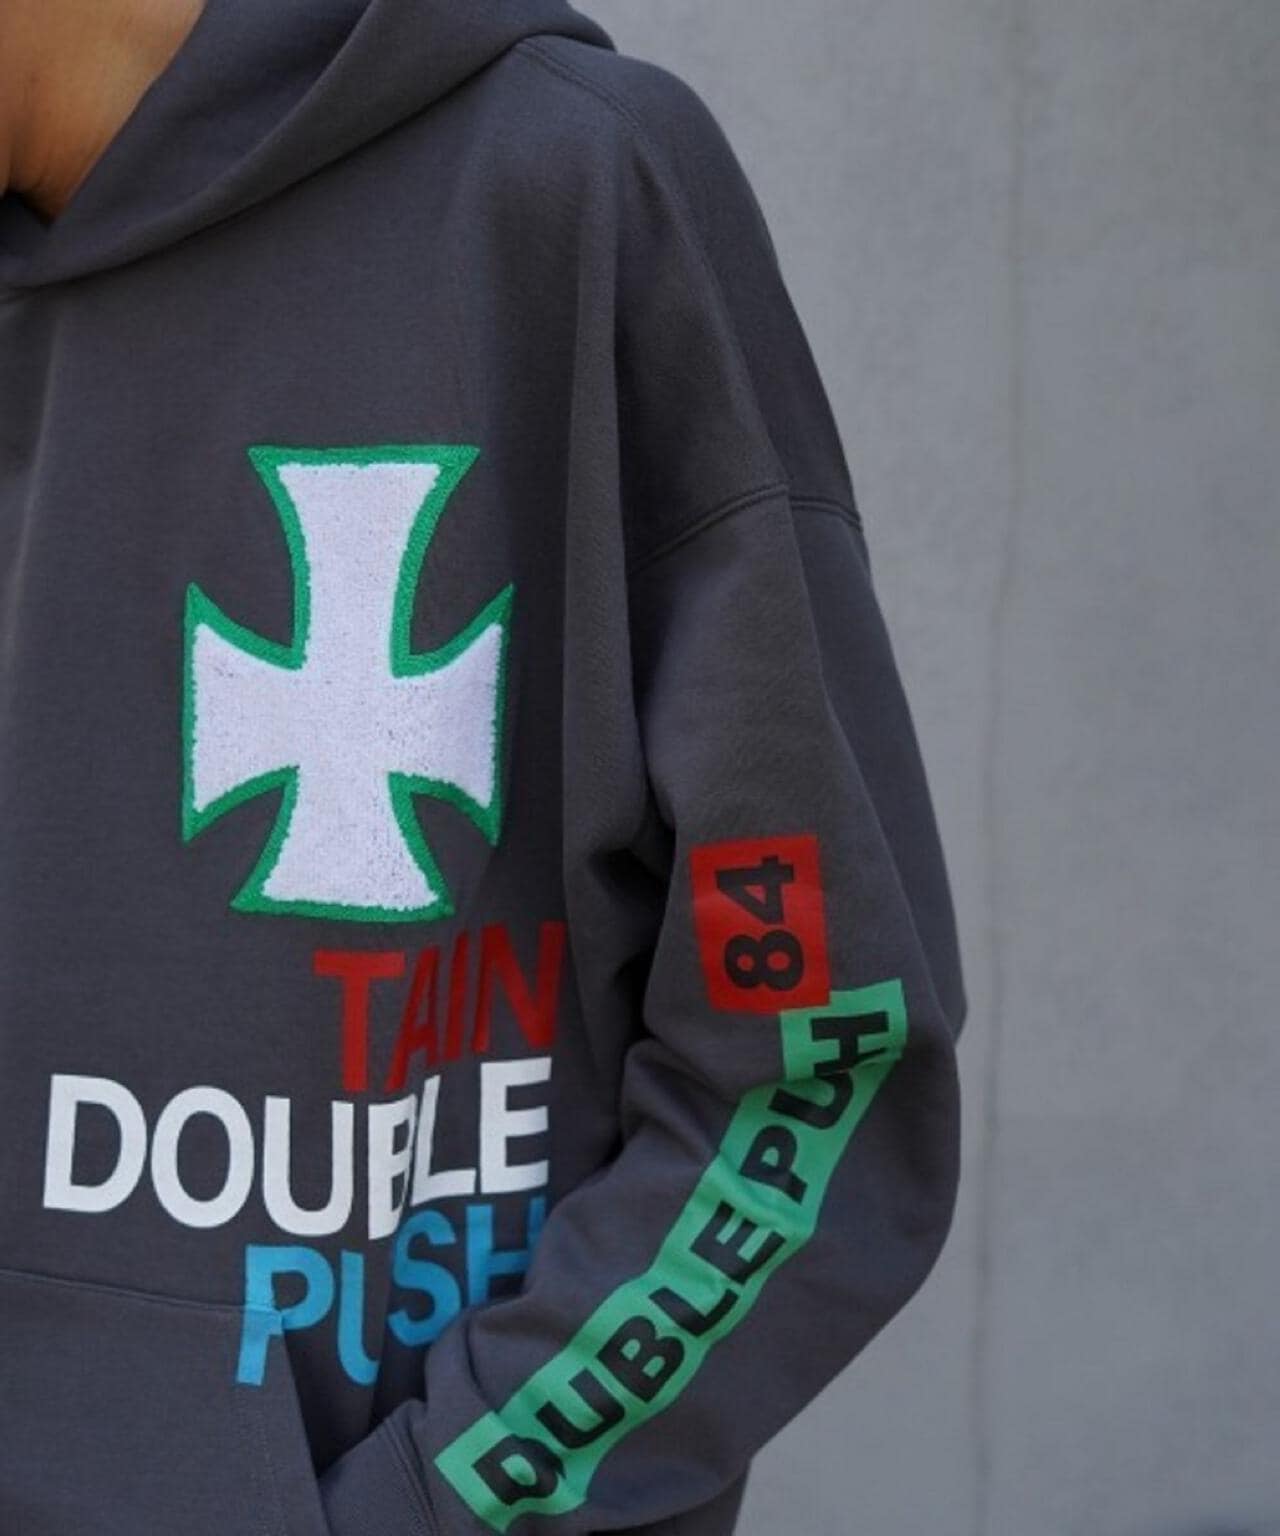 TAIN DOUBLE PUSH/T CROSS EMBROIDERY P/O HOODIE